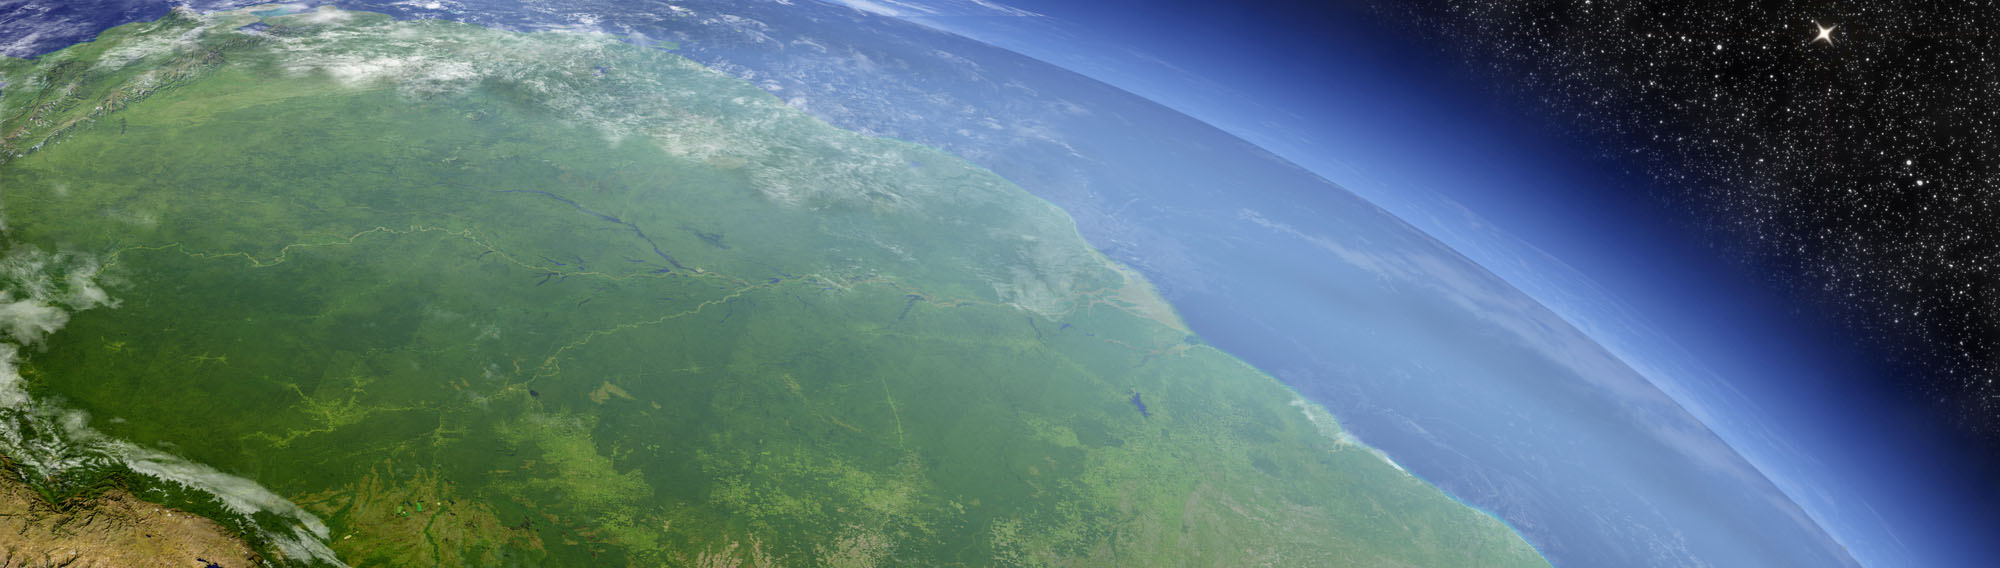 A view of the Earth from space, centered on South America.